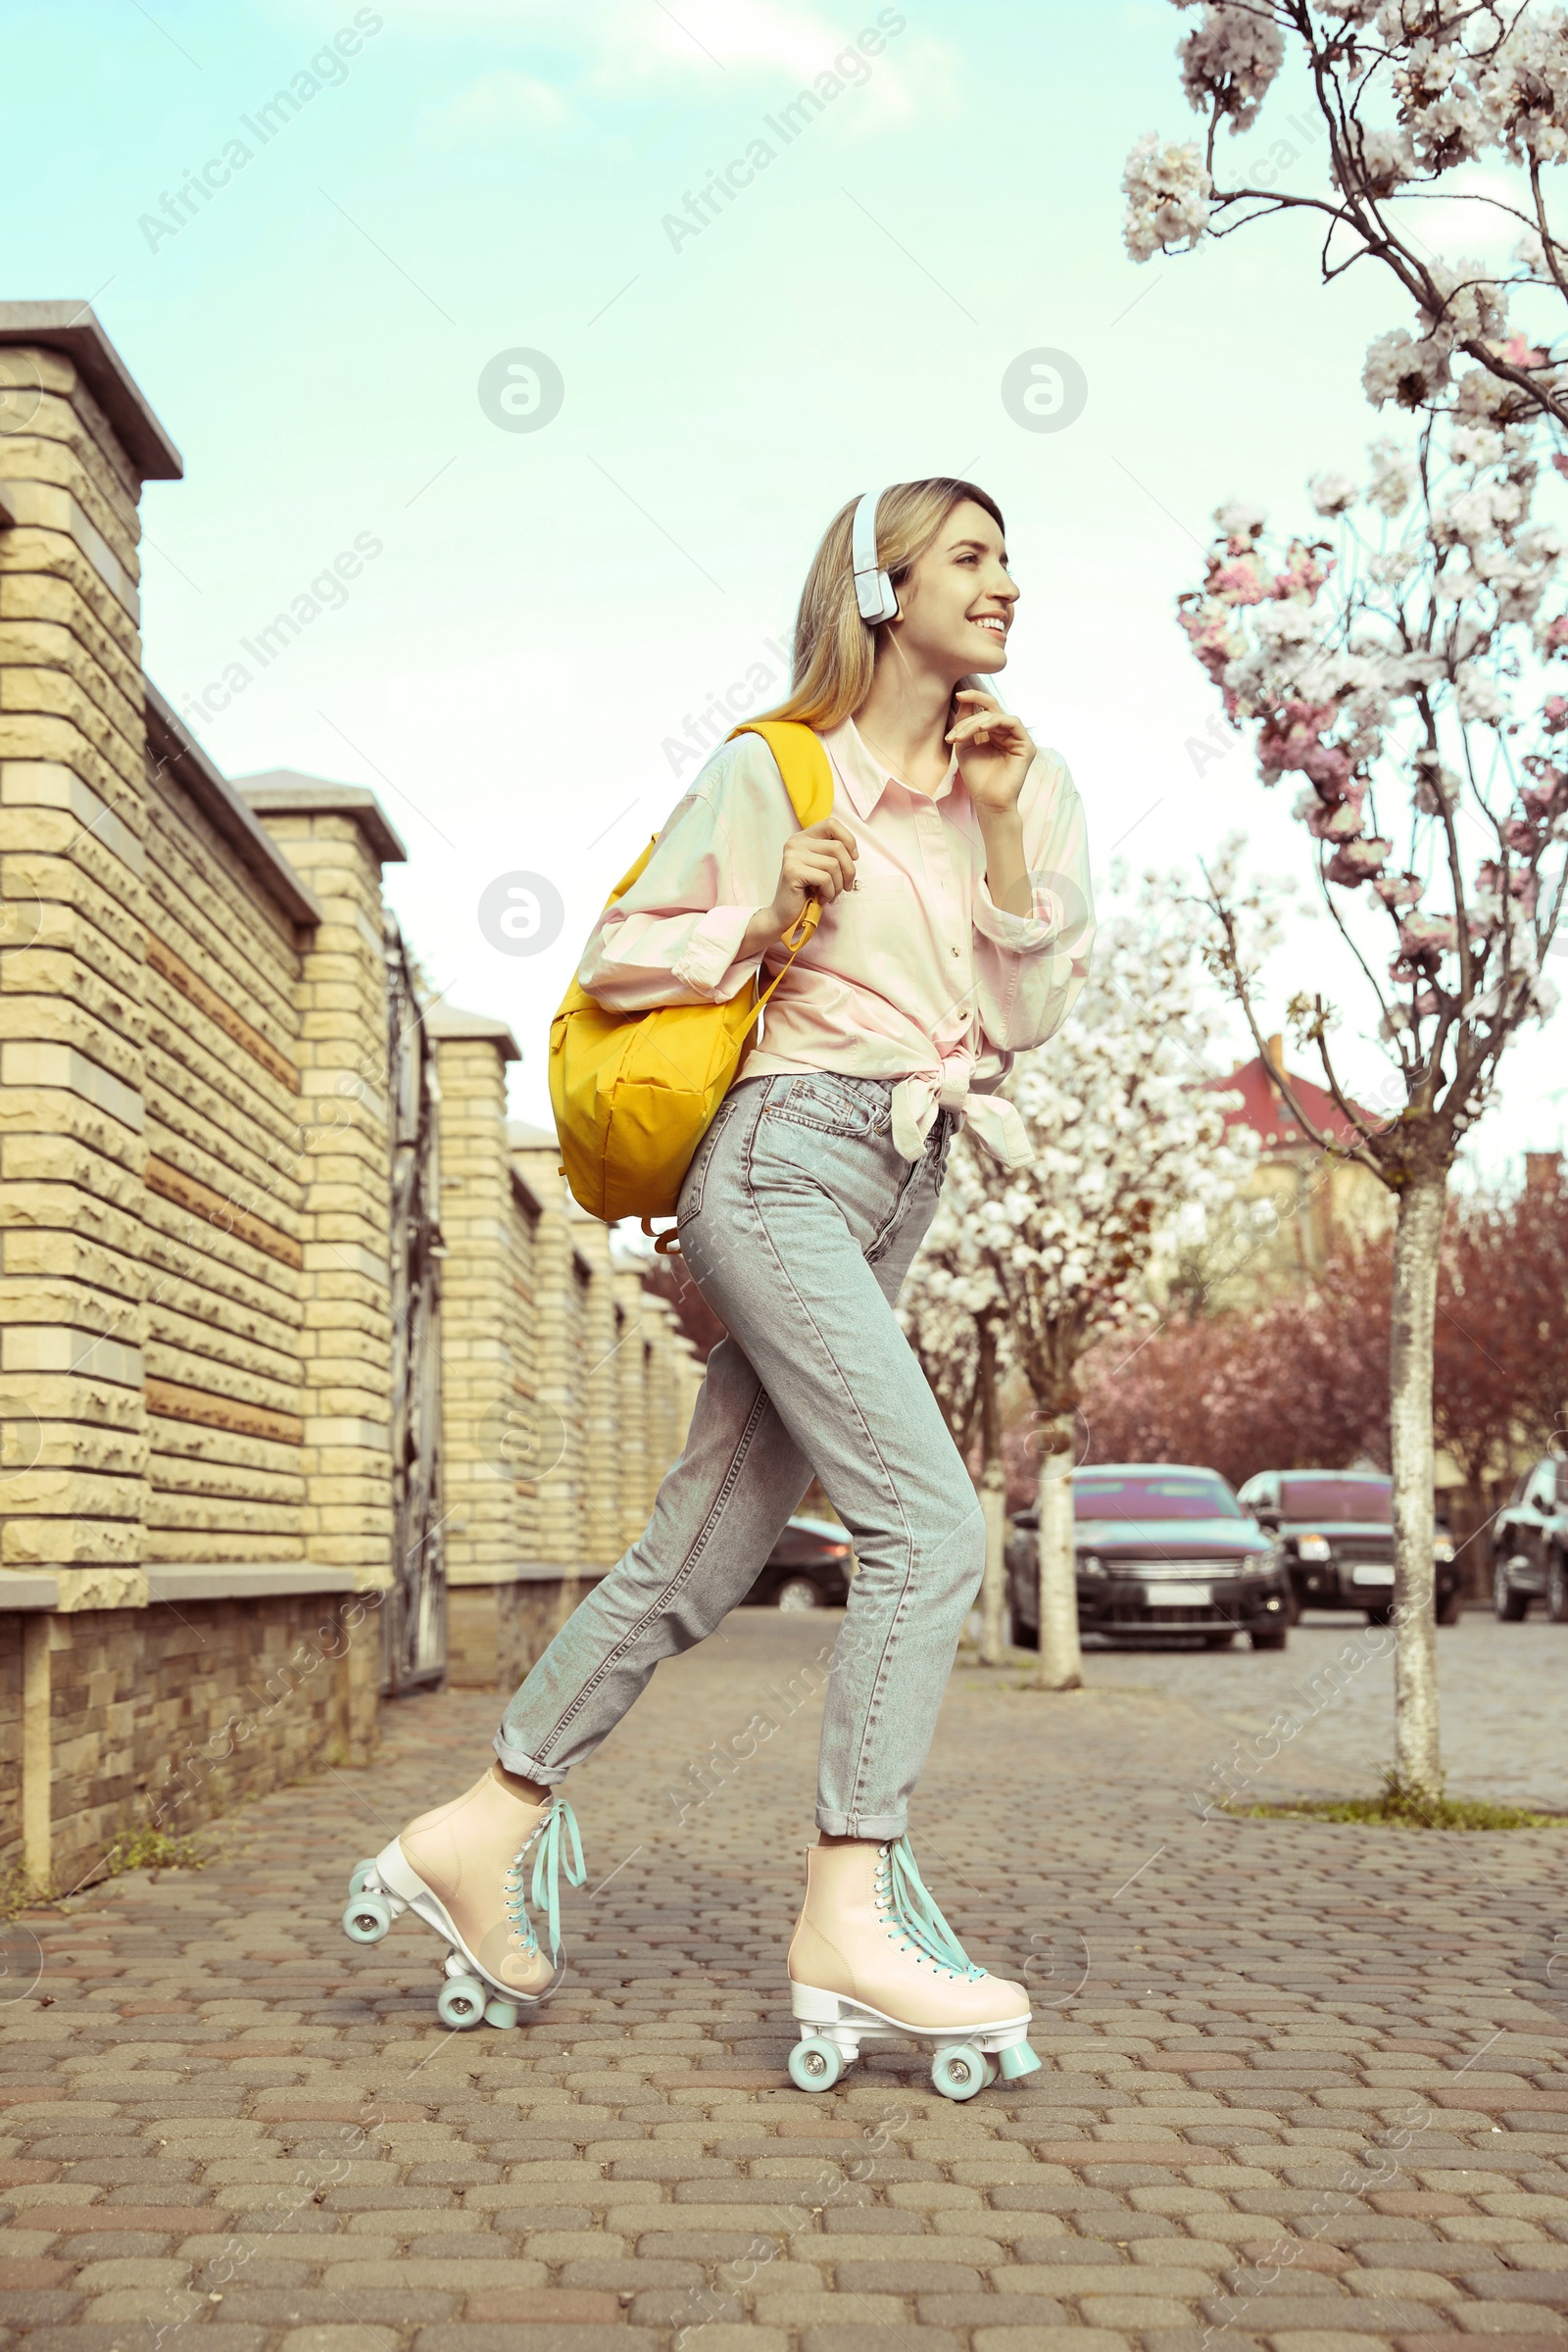 Image of Young woman roller skating on city street